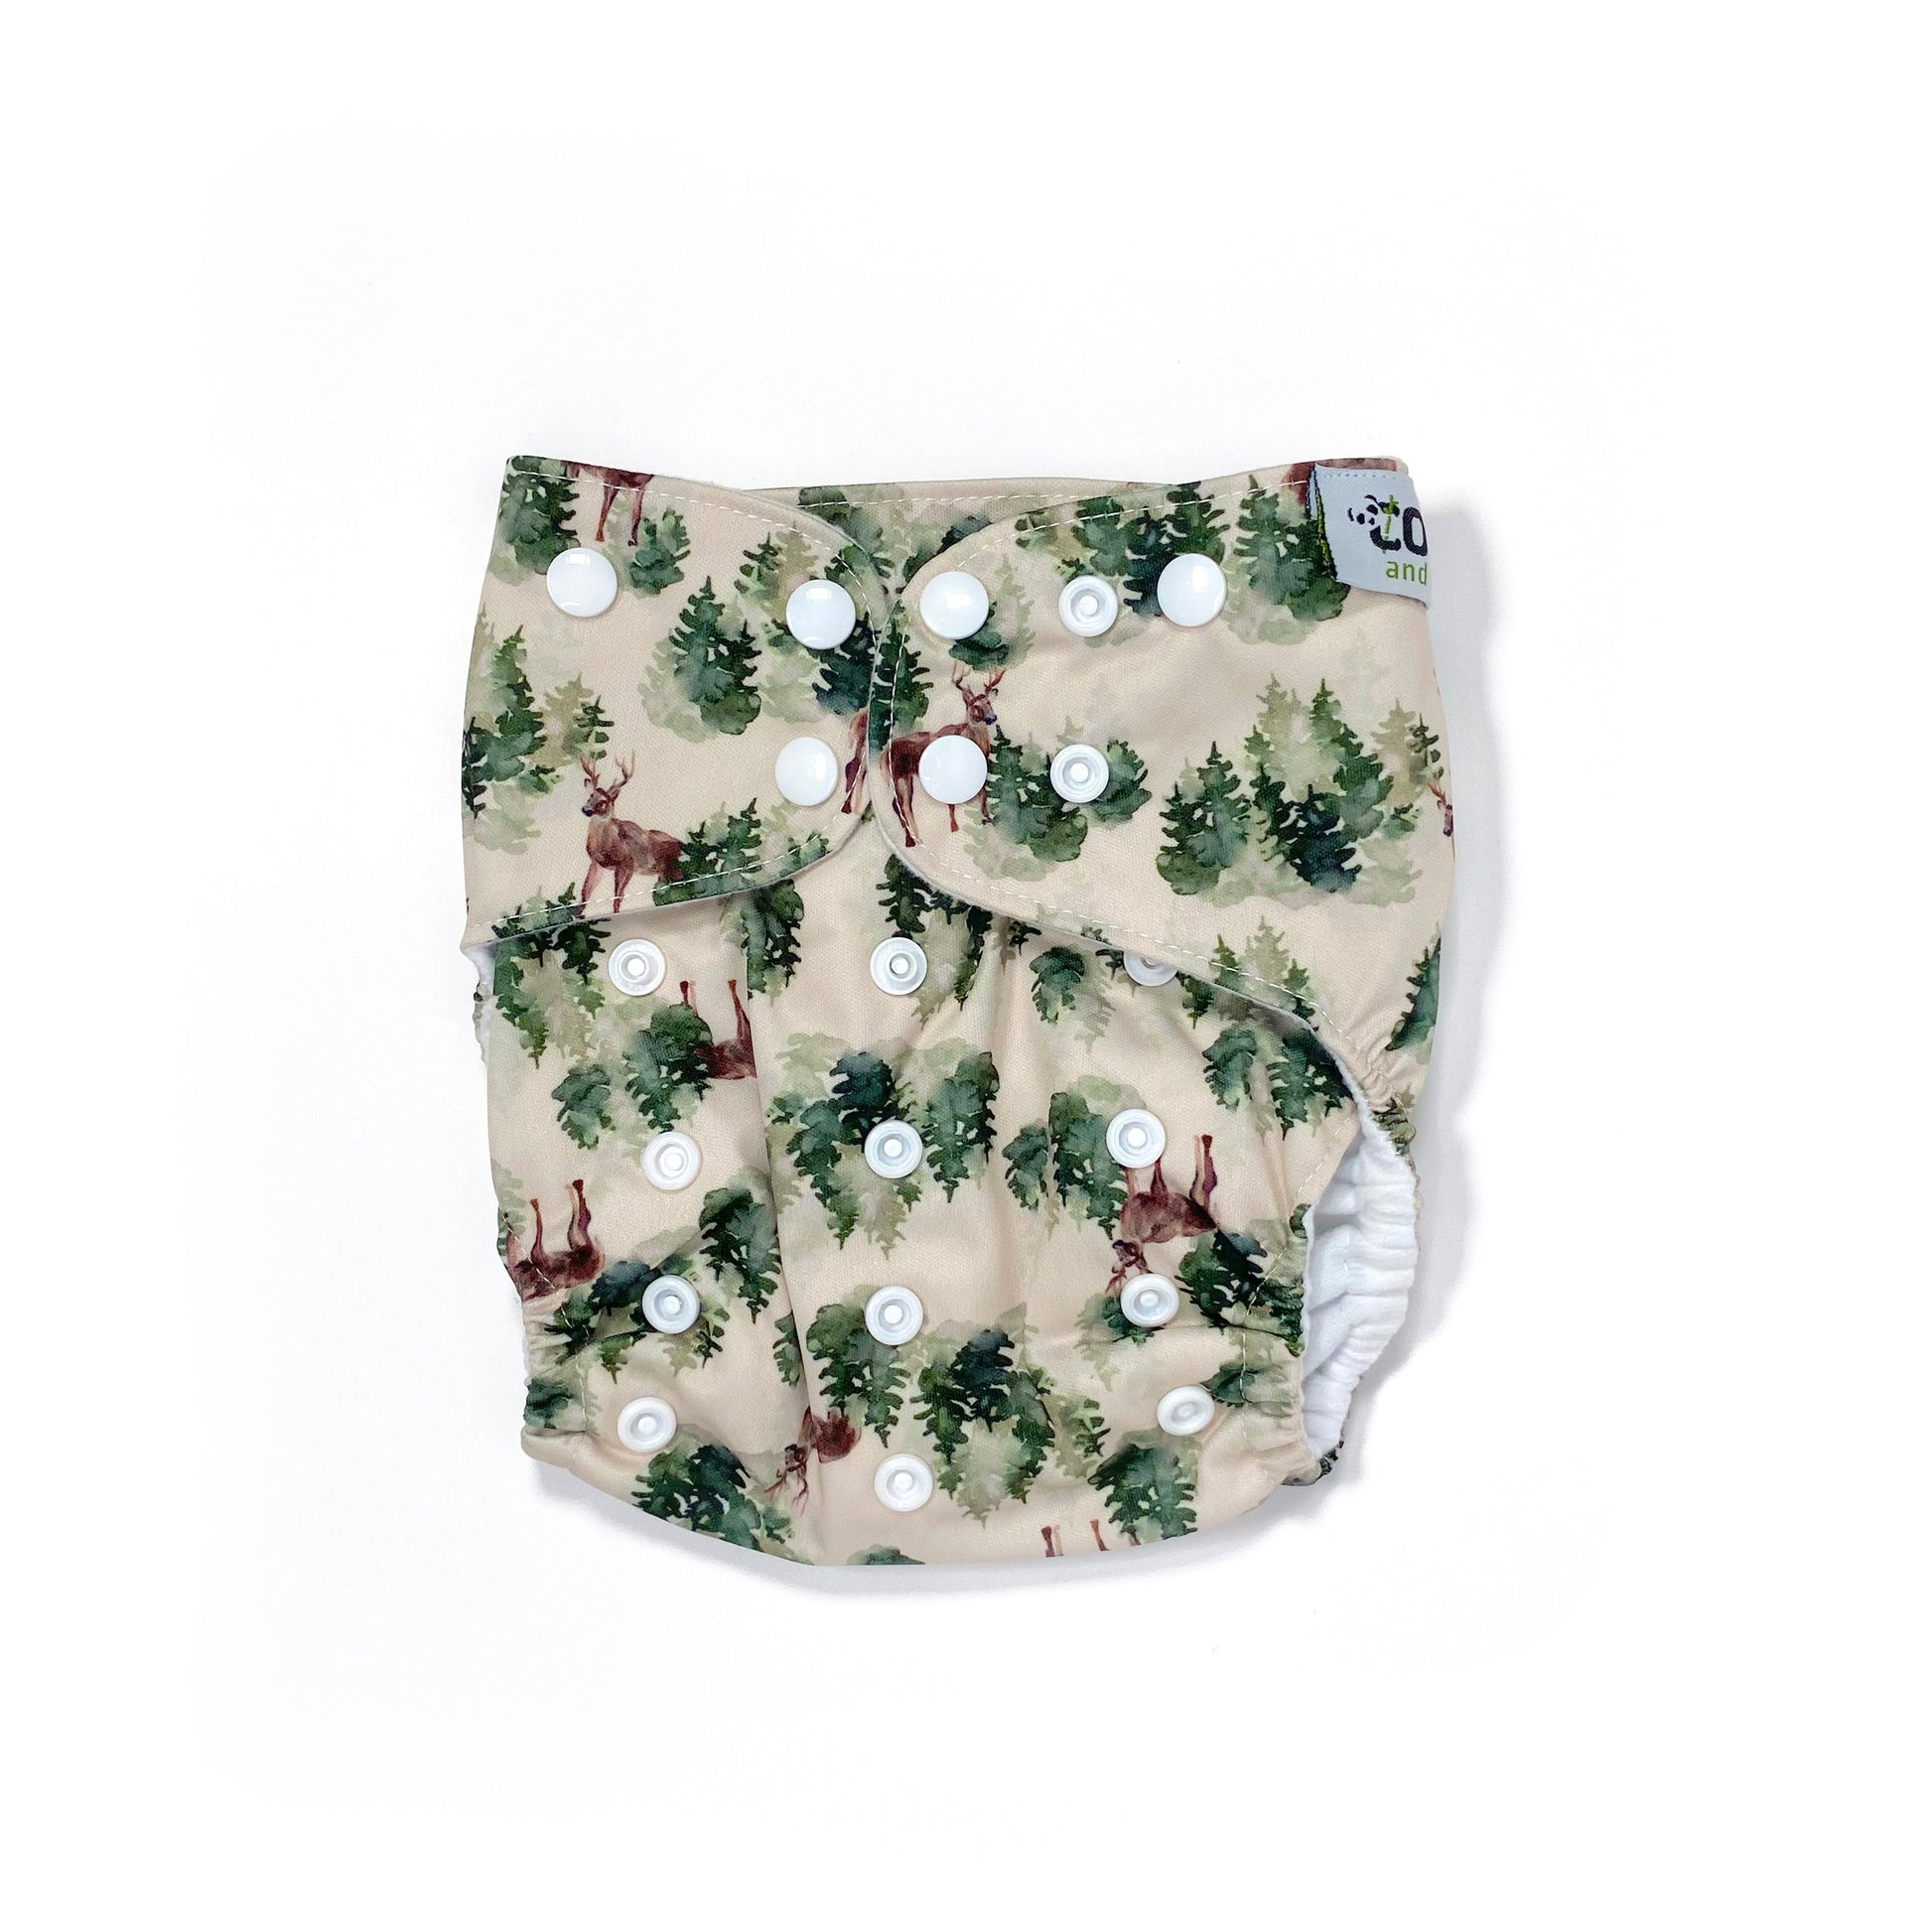 An adjustable reusable nappy for babies and toddlers, featuring a winter forest design with images of deer and pine trees on a cream background. View shows the front of the nappy, with fastenings closed.